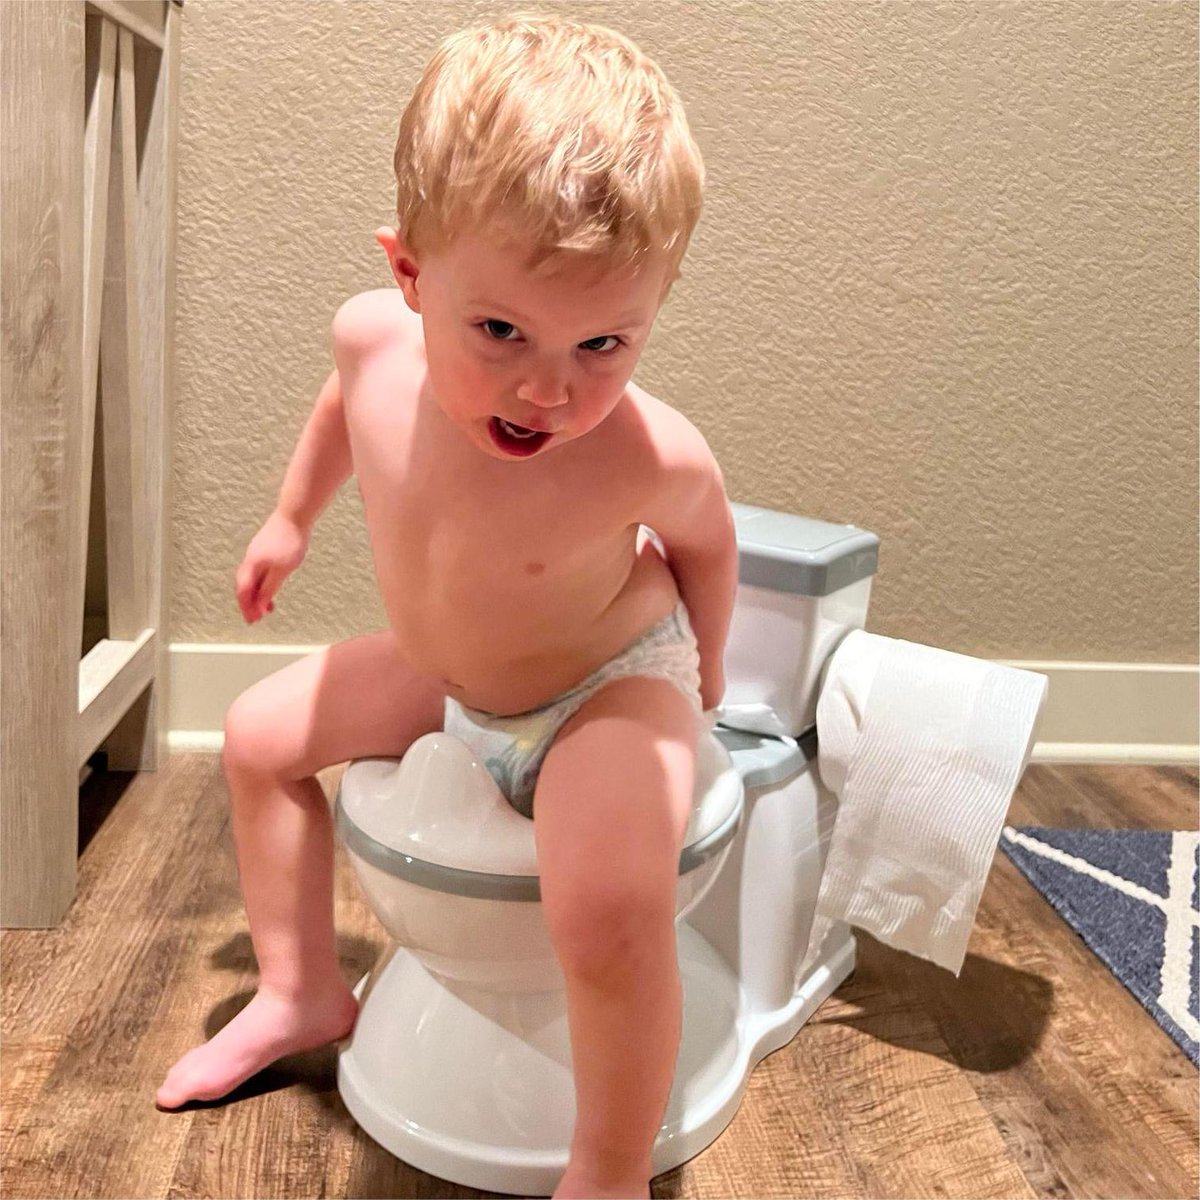 Unlocked a new achievement: using the potty! Are you ready to join me? 🙌

#pottytraining #babydevelopment #babypotty #parenting #Parents #kids #baby #parentingtips